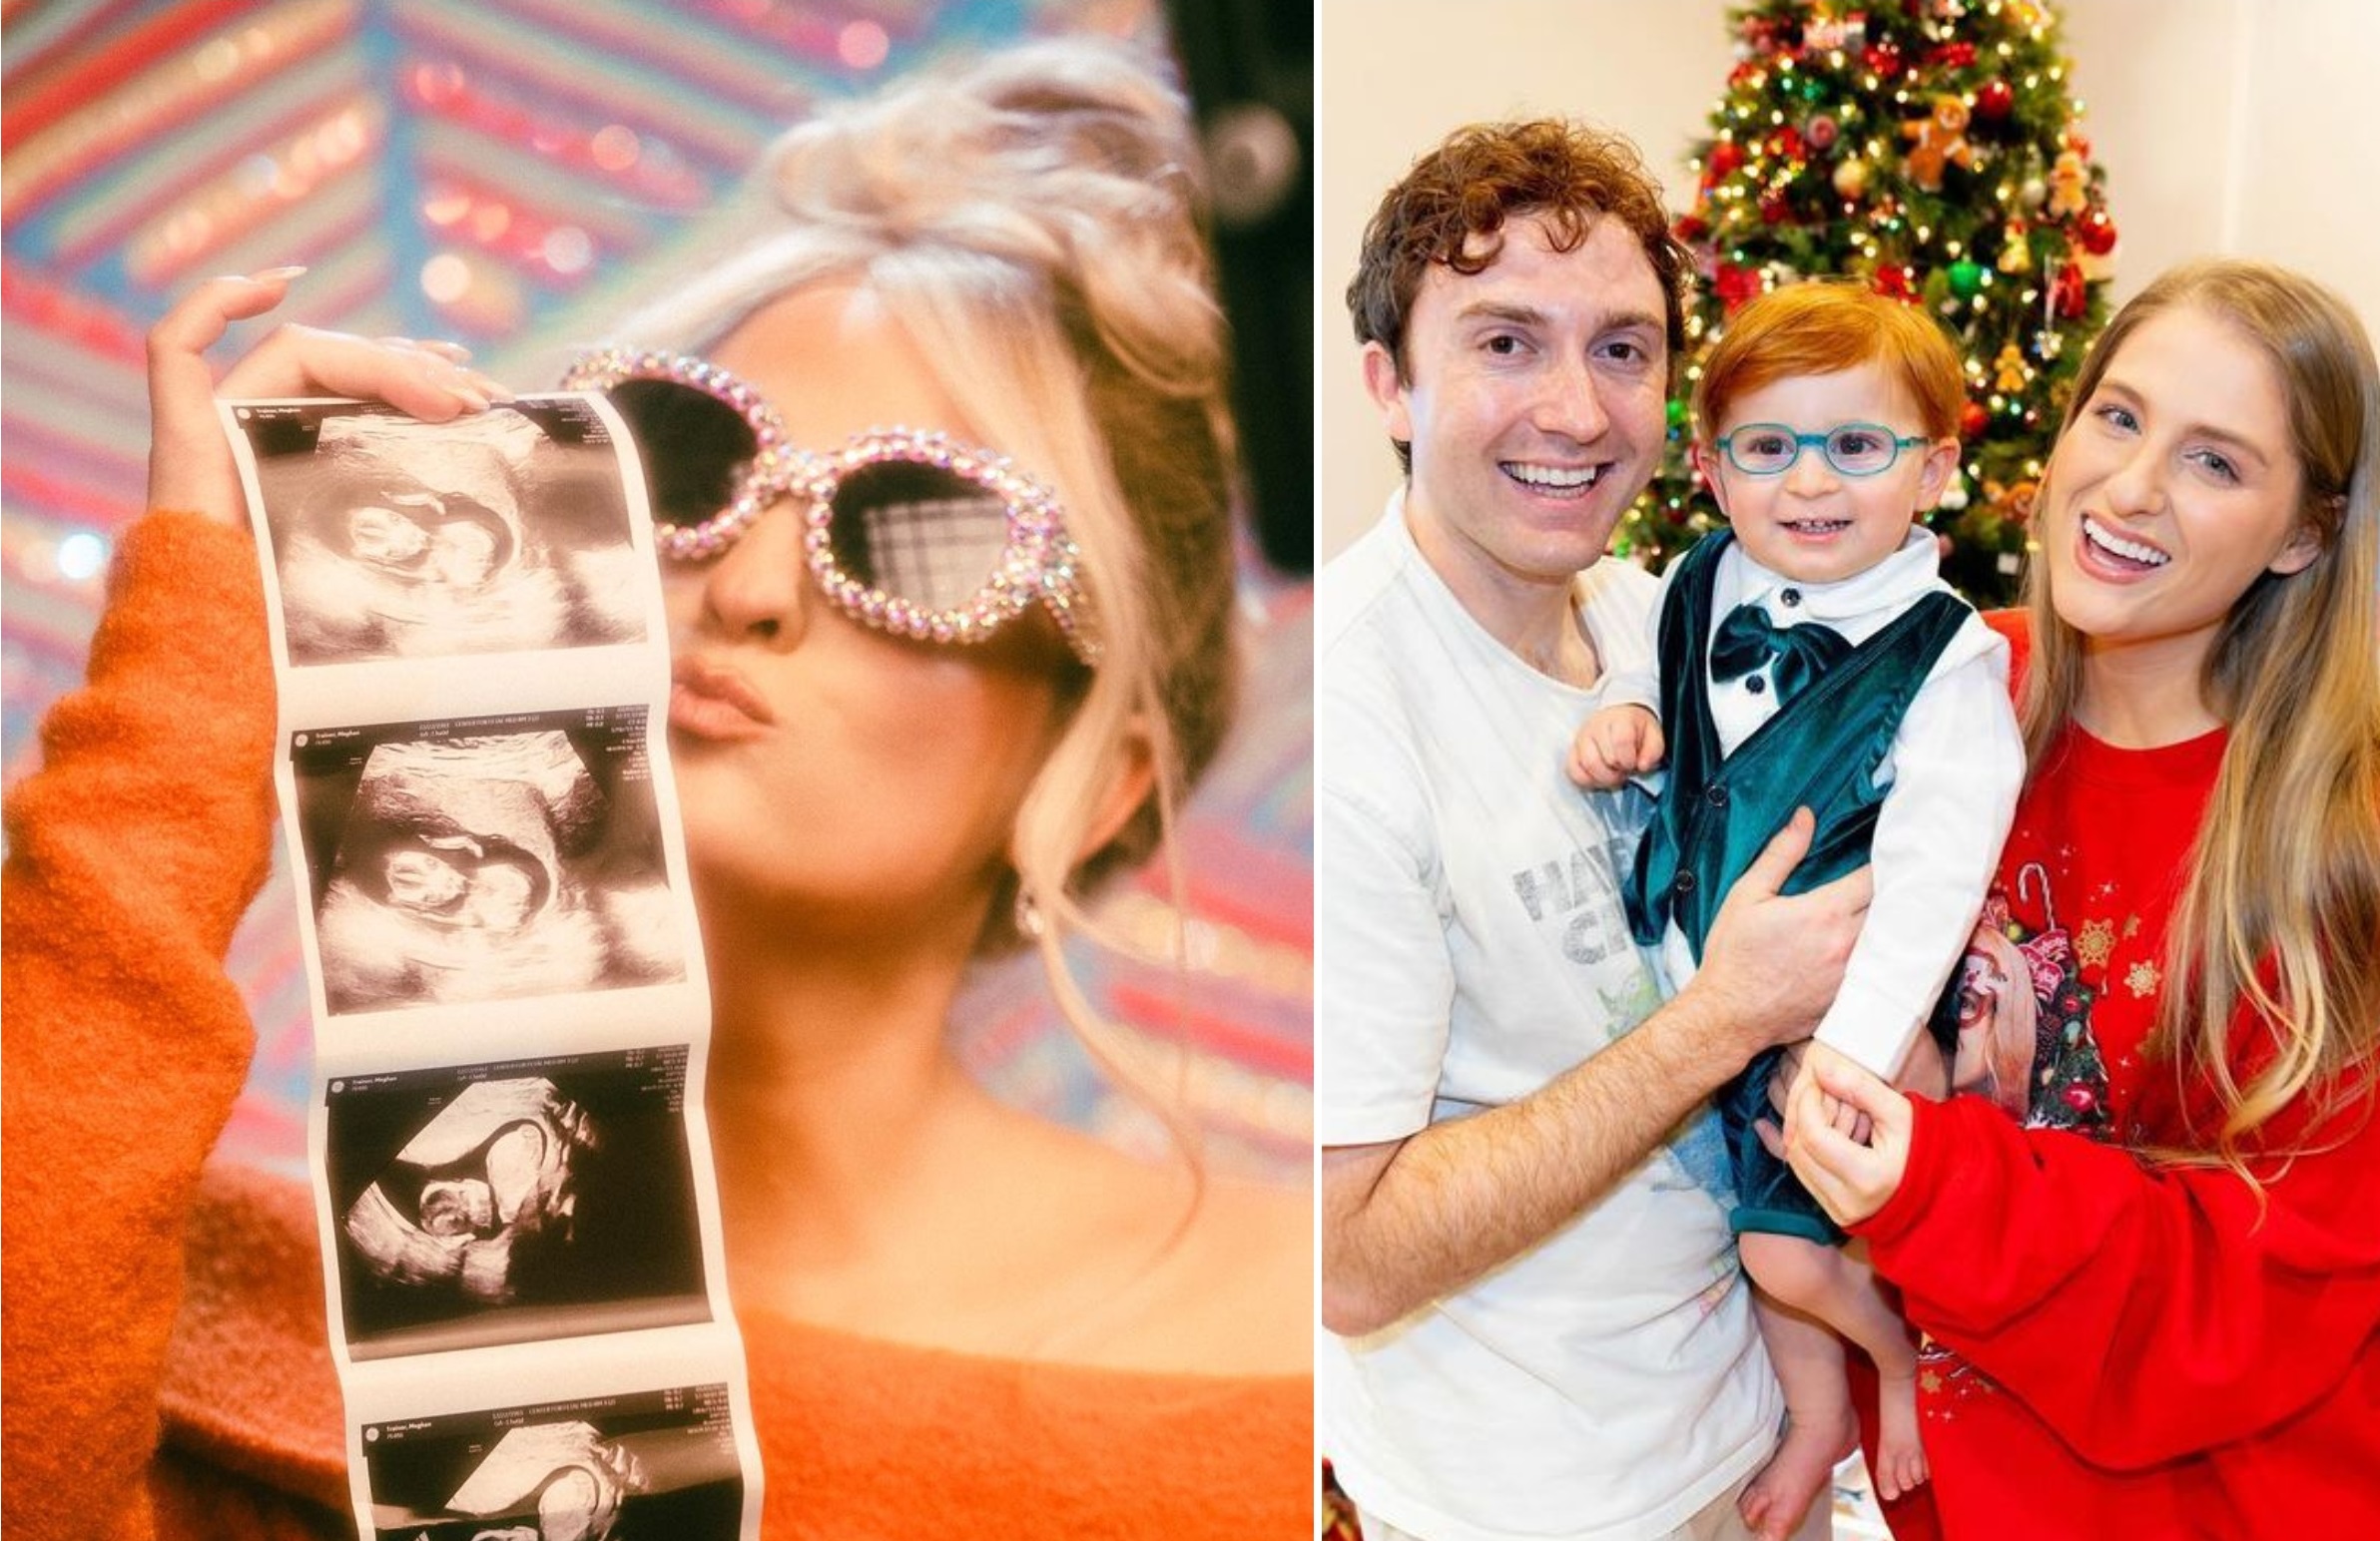 Meghan Trainor has had her second baby. His name may surprise you